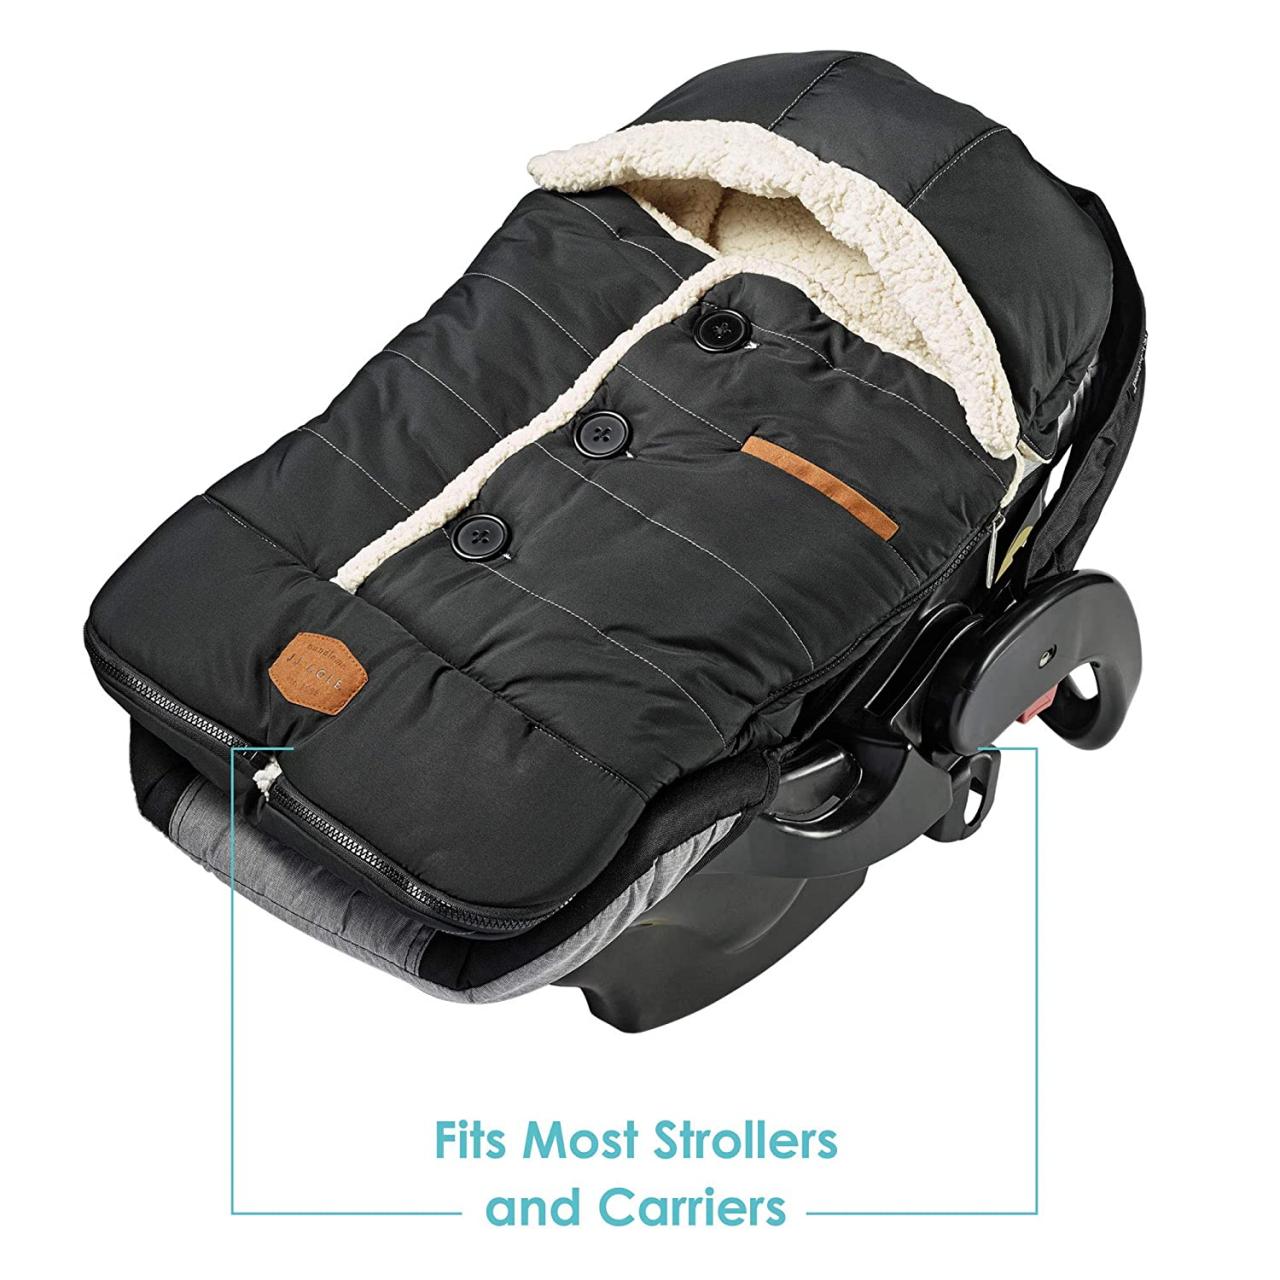 Buy JJ Cole - Urban Bundleme, Canopy Style Bunting Bag to Protect Baby from  Cold and Winter Weather in Car Seats and Strollers, Blackout, Infant Online  in Indonesia. B07HBRG752